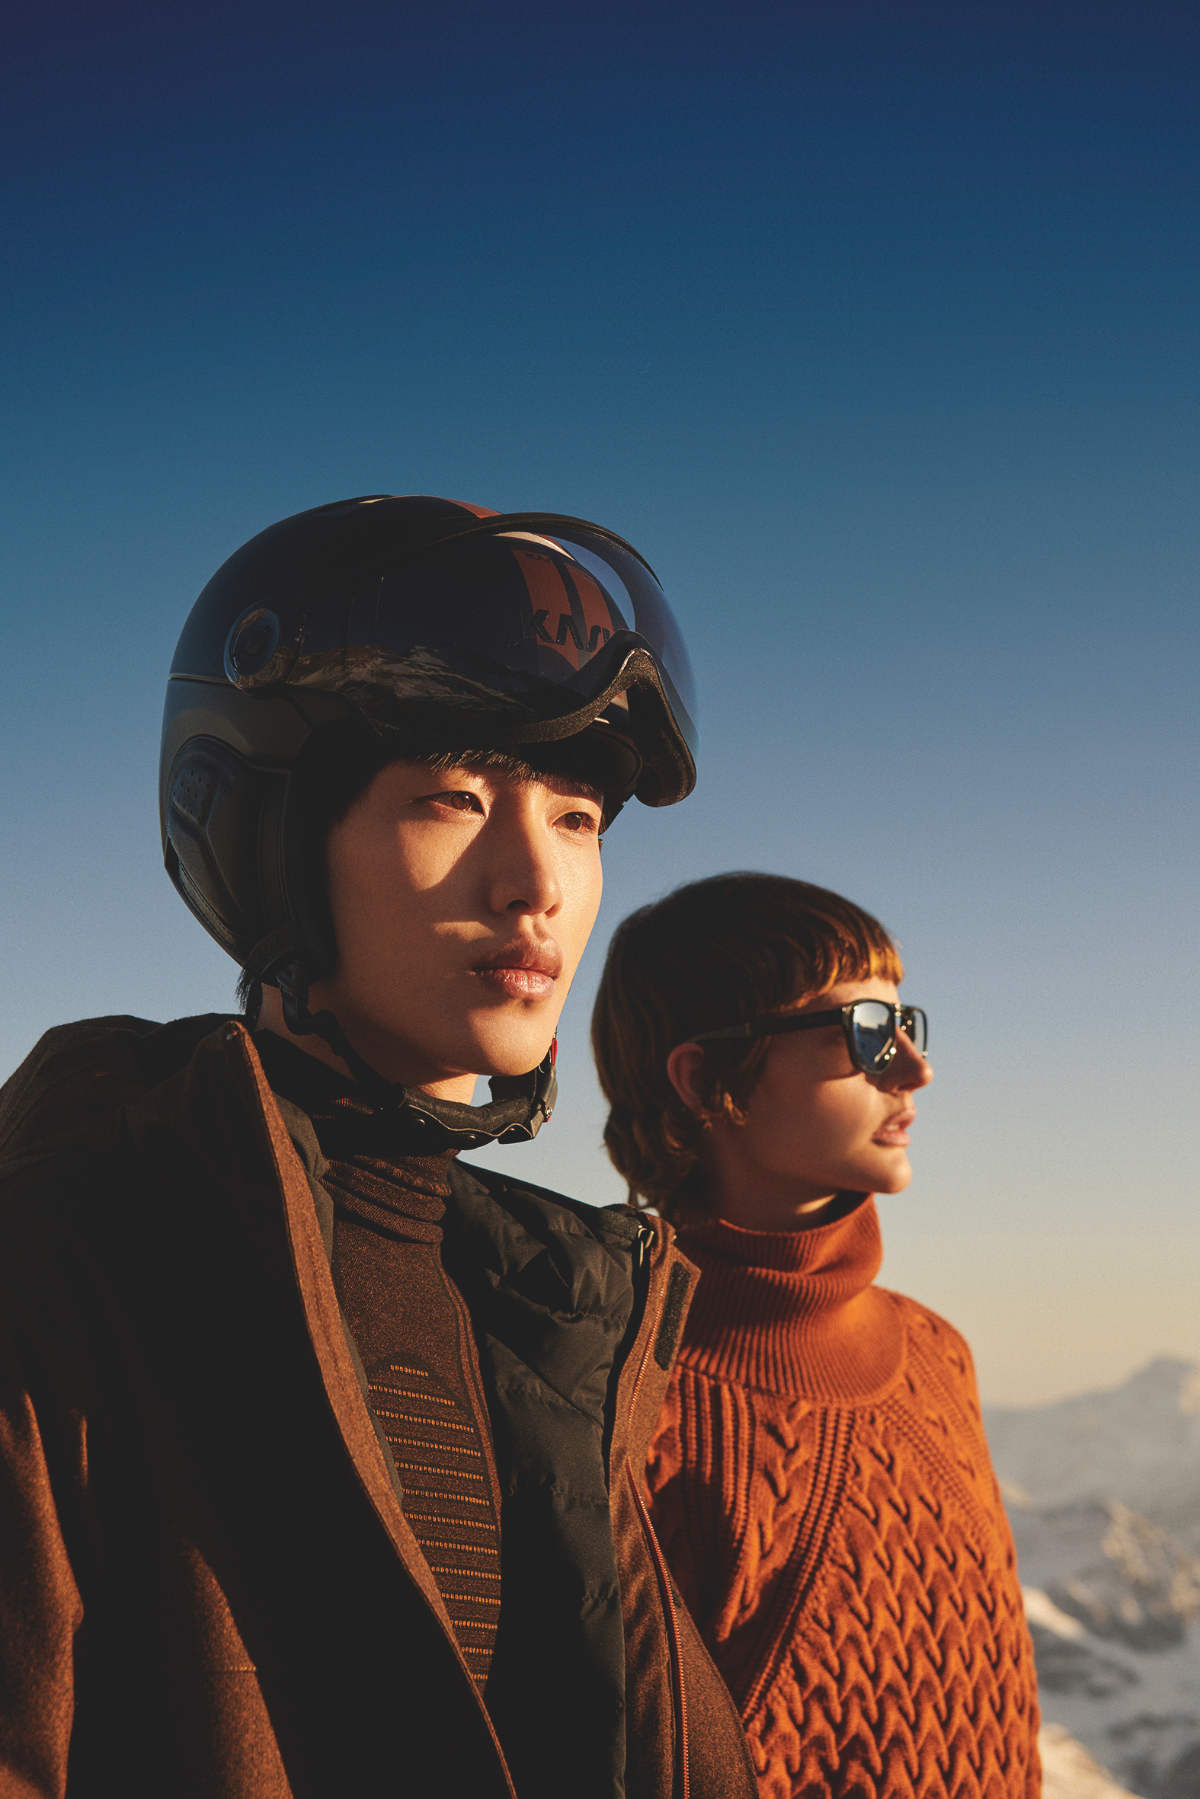 Born In Oasi Zegna: The Outdoor Collection